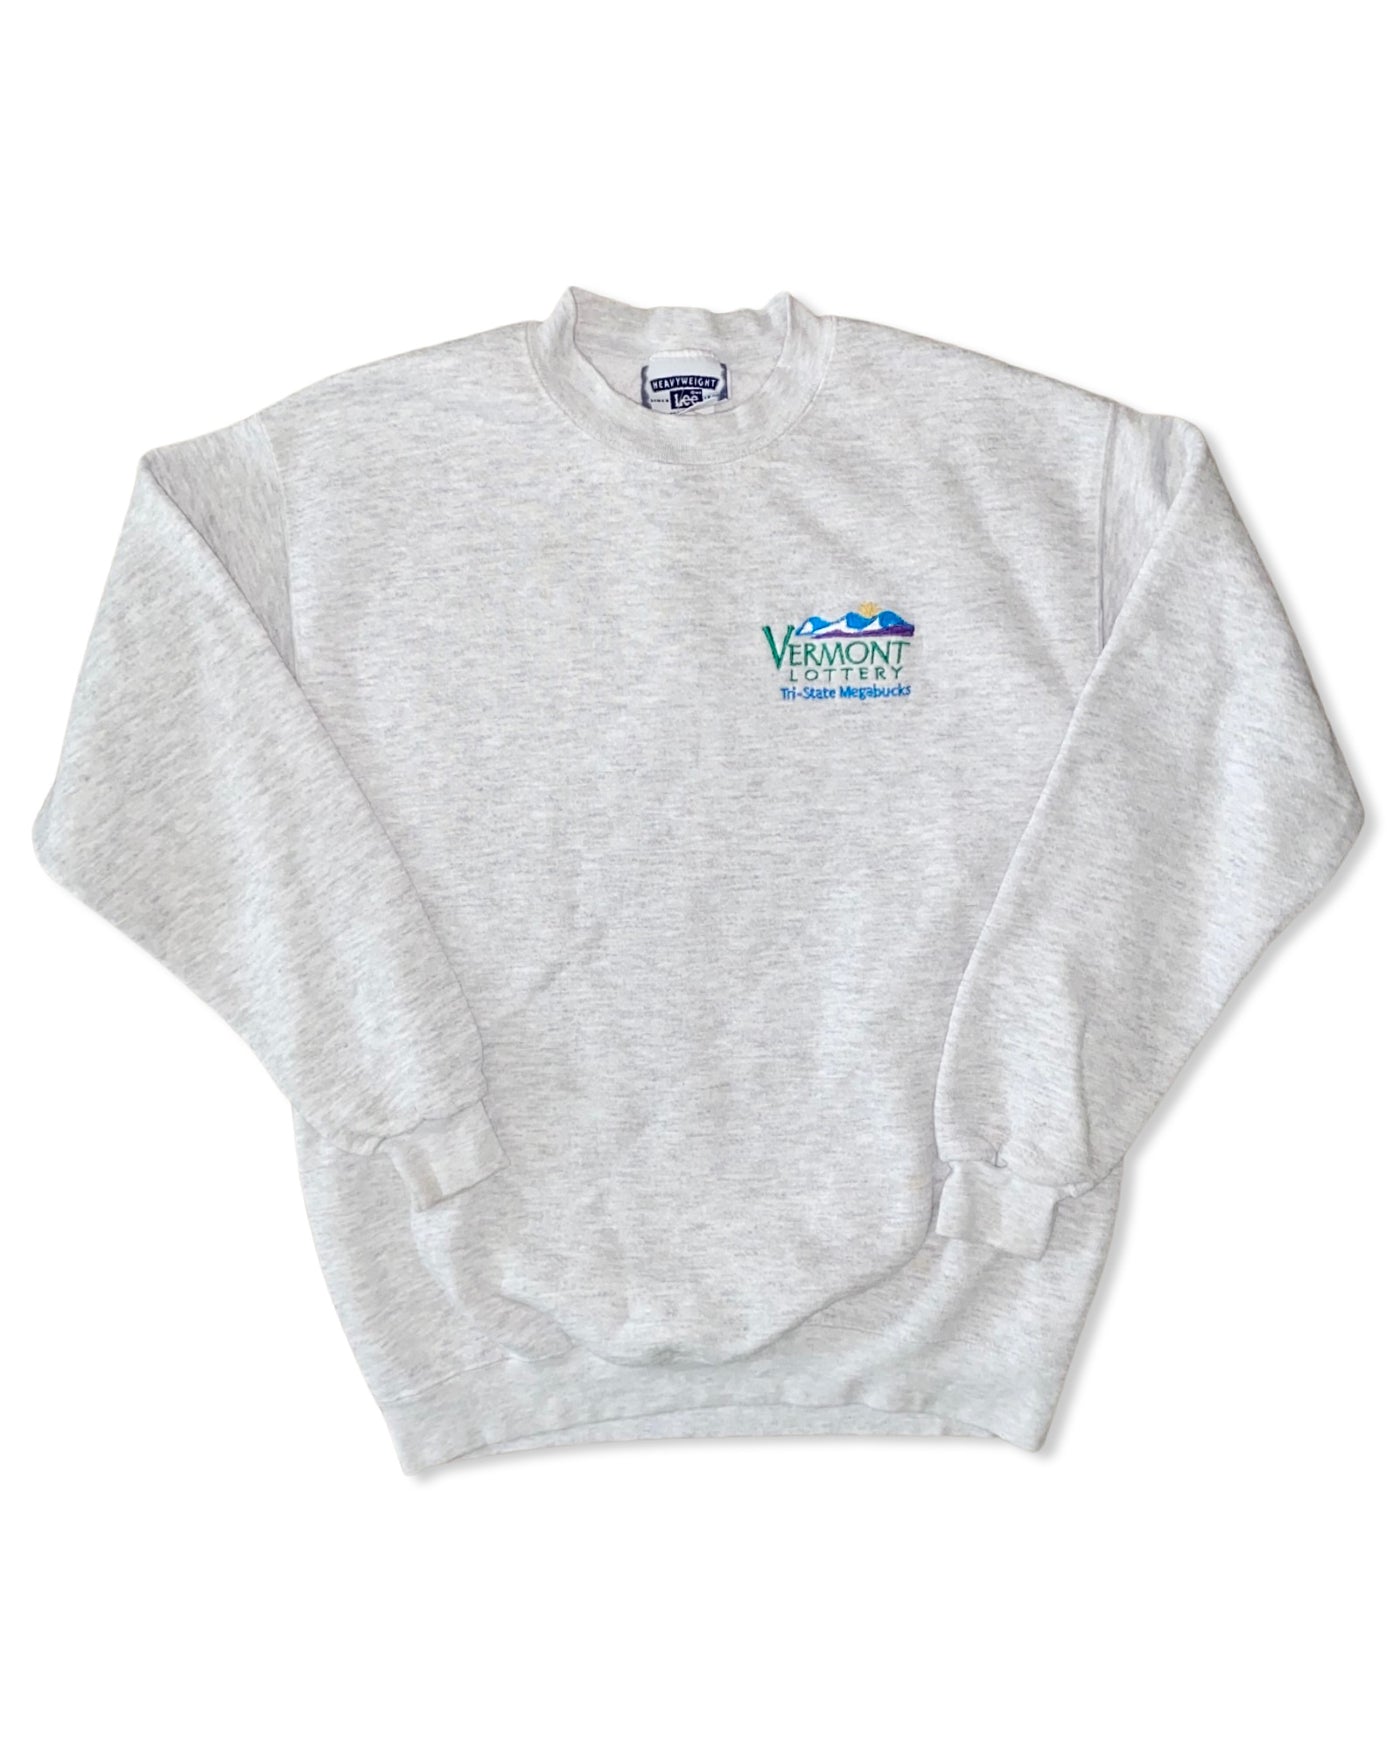 Vintage 90s Vermont Lottery Embroidered Crewneck